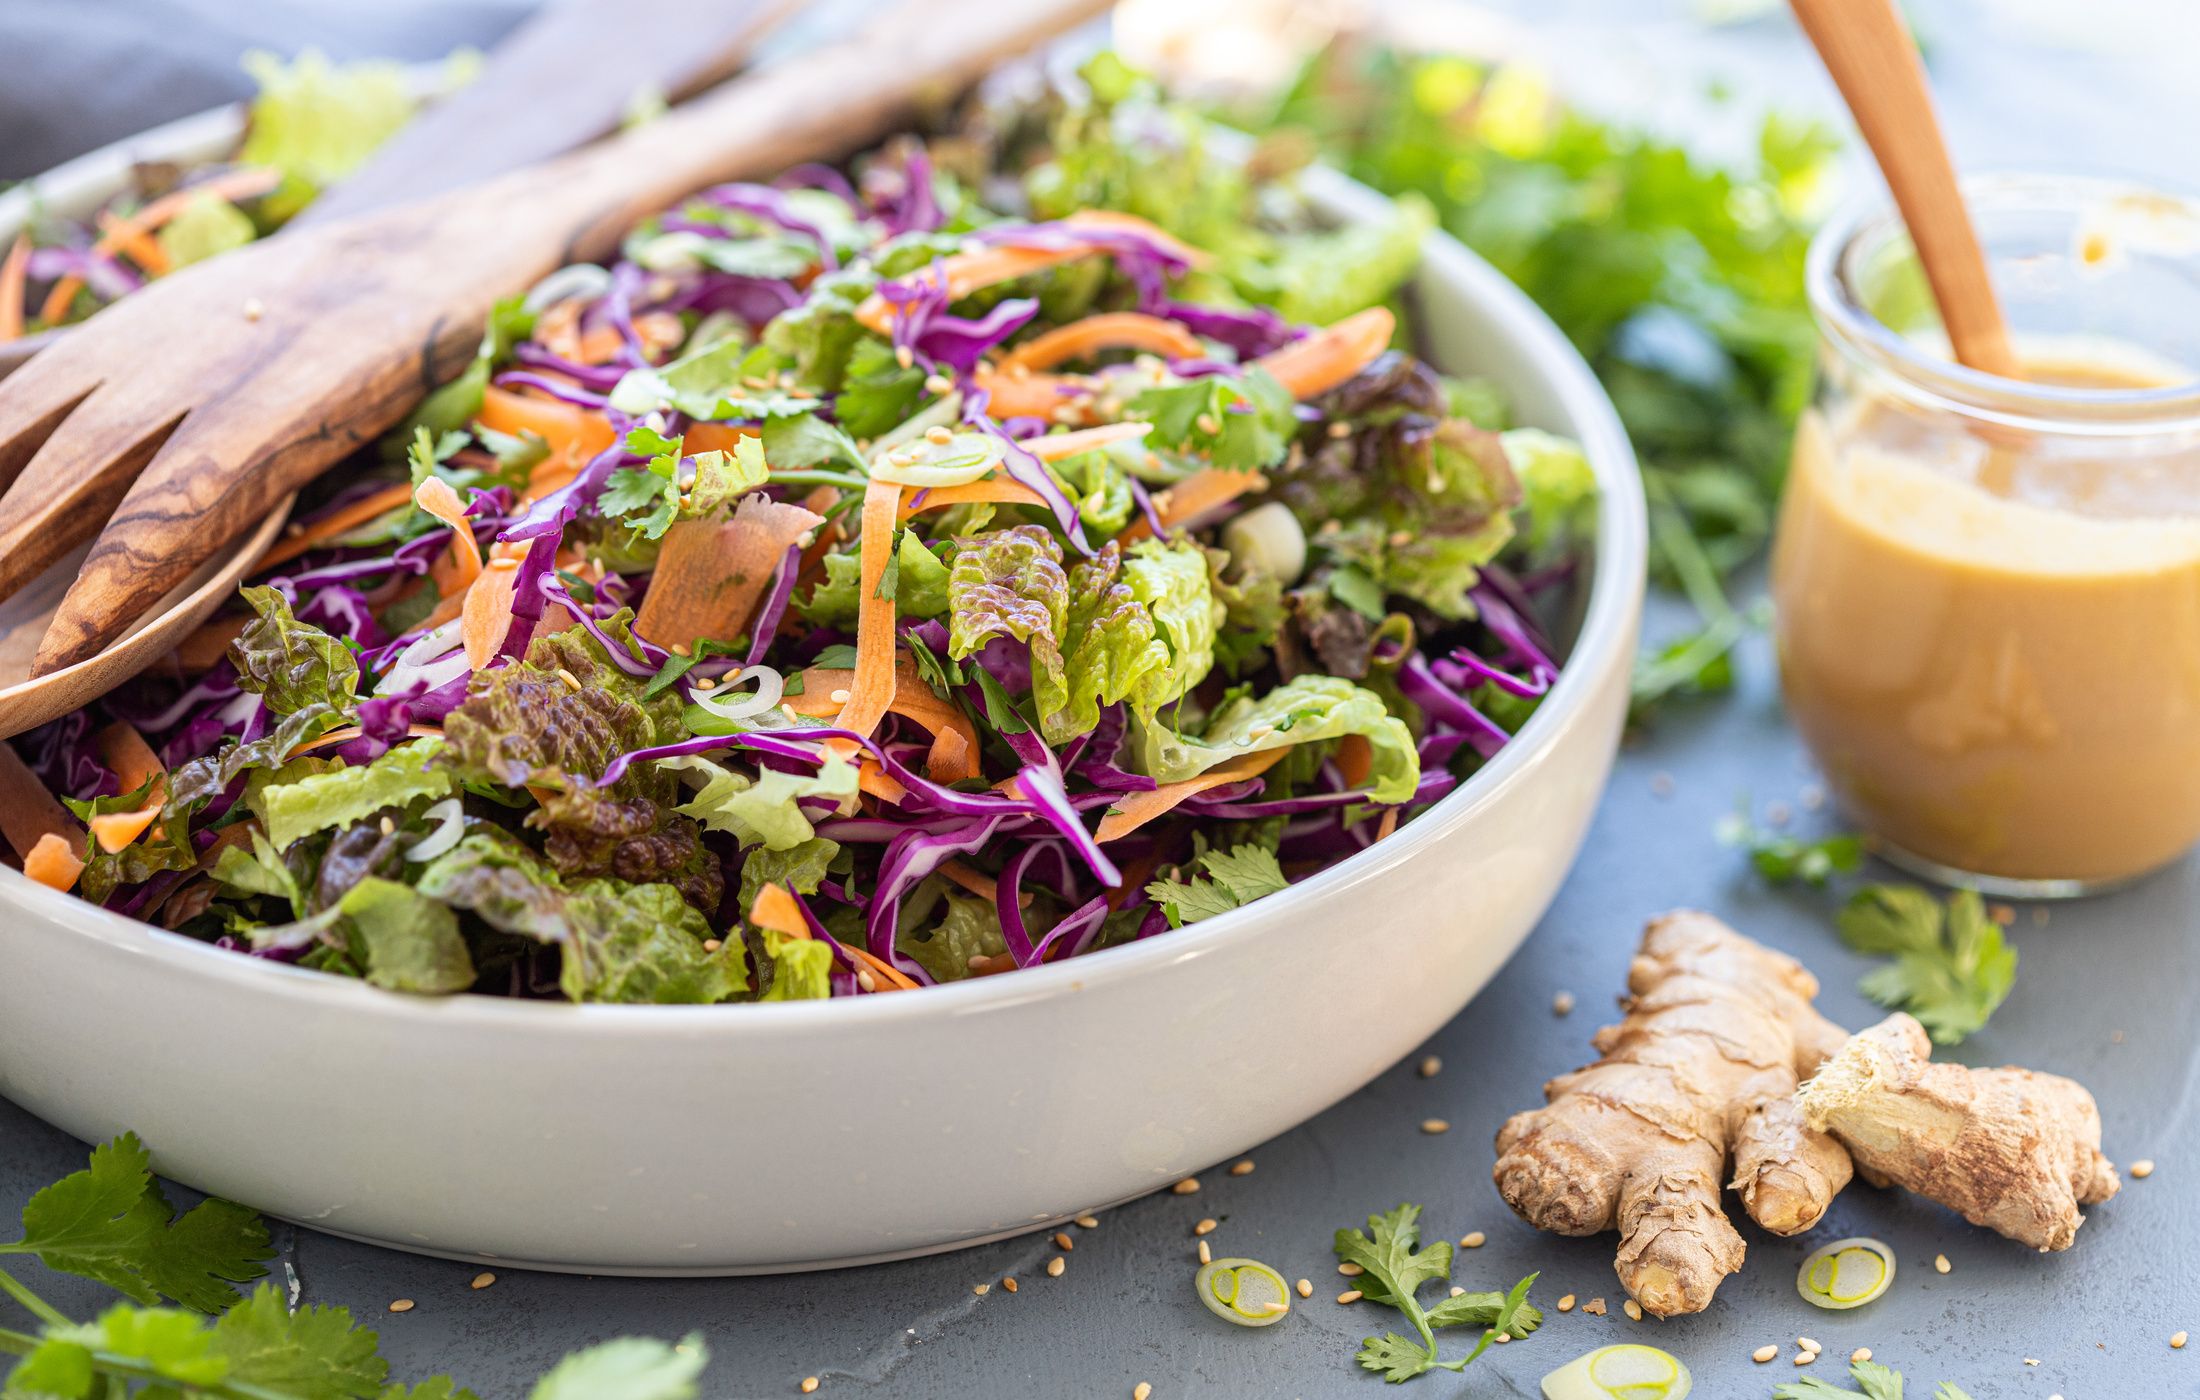  Lettuce and Cabbage Salad with Creamy Ginger Dressing